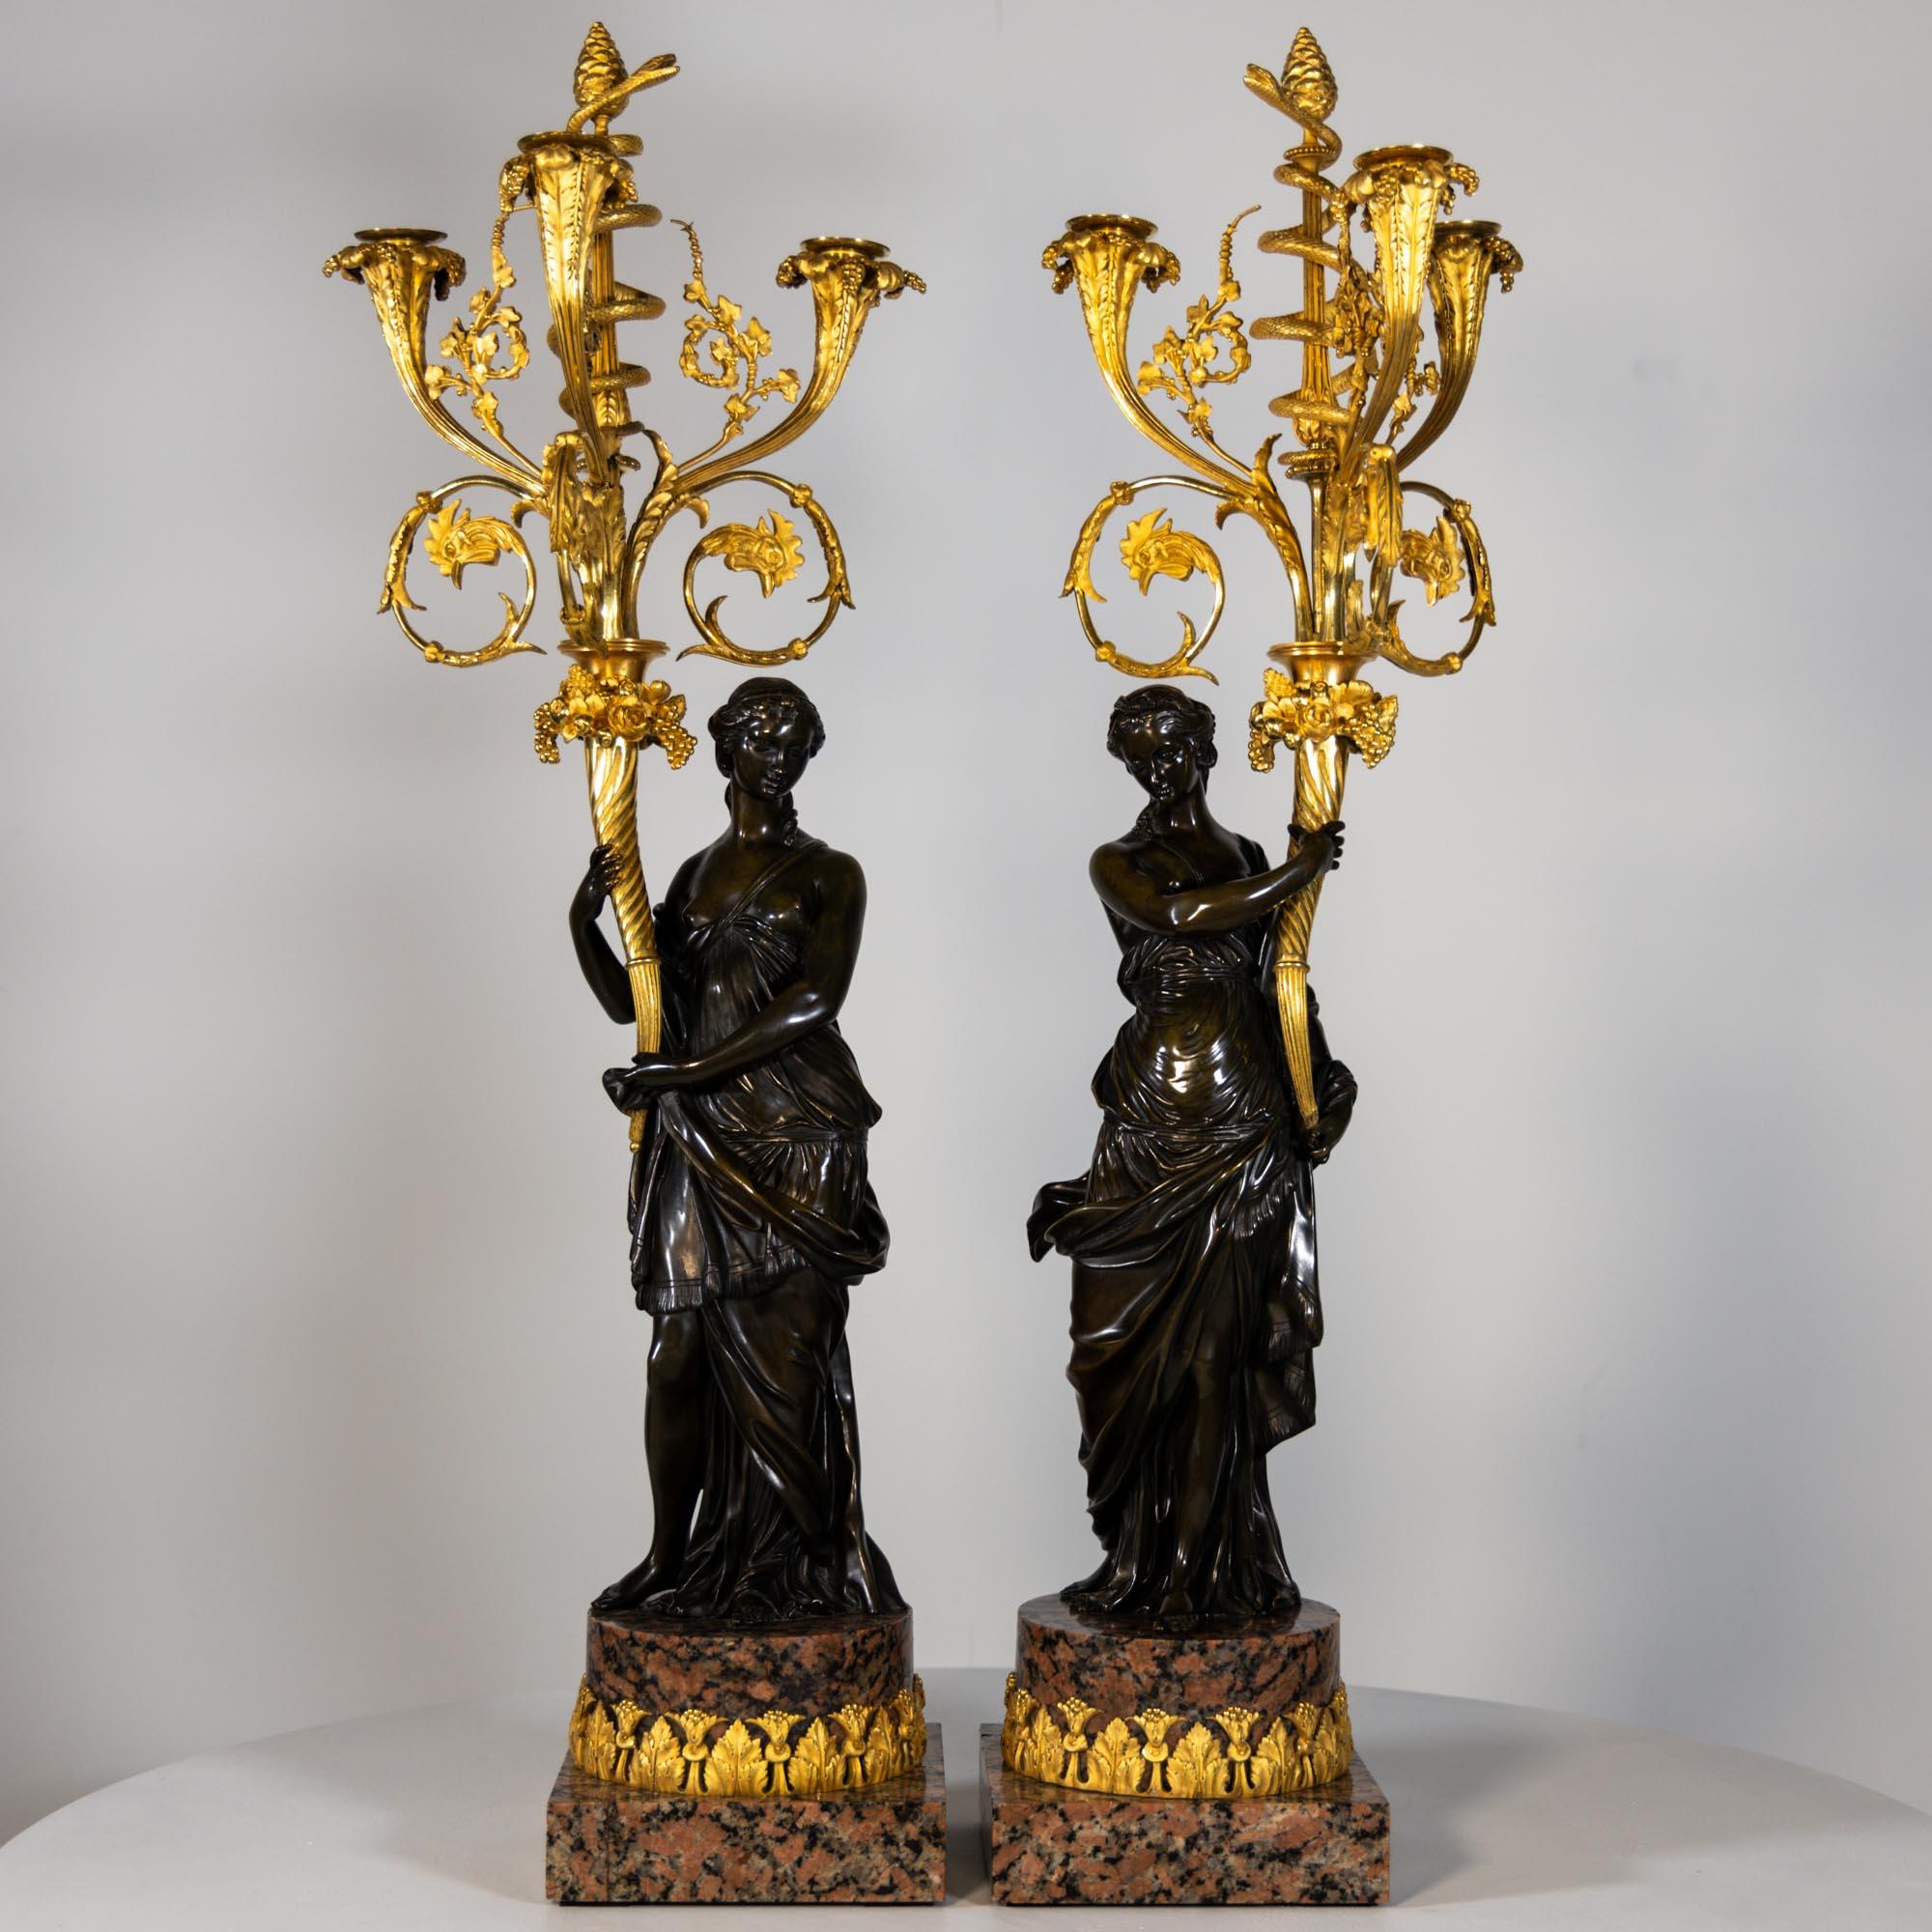 Pair of candelabra made of fire-gilt and burnished bronze. The female figures are depicted in ancient dress and carry cornucopias that develop into projecting candelabra and end in a spiralling serpent around the central thyrsos staff with pine